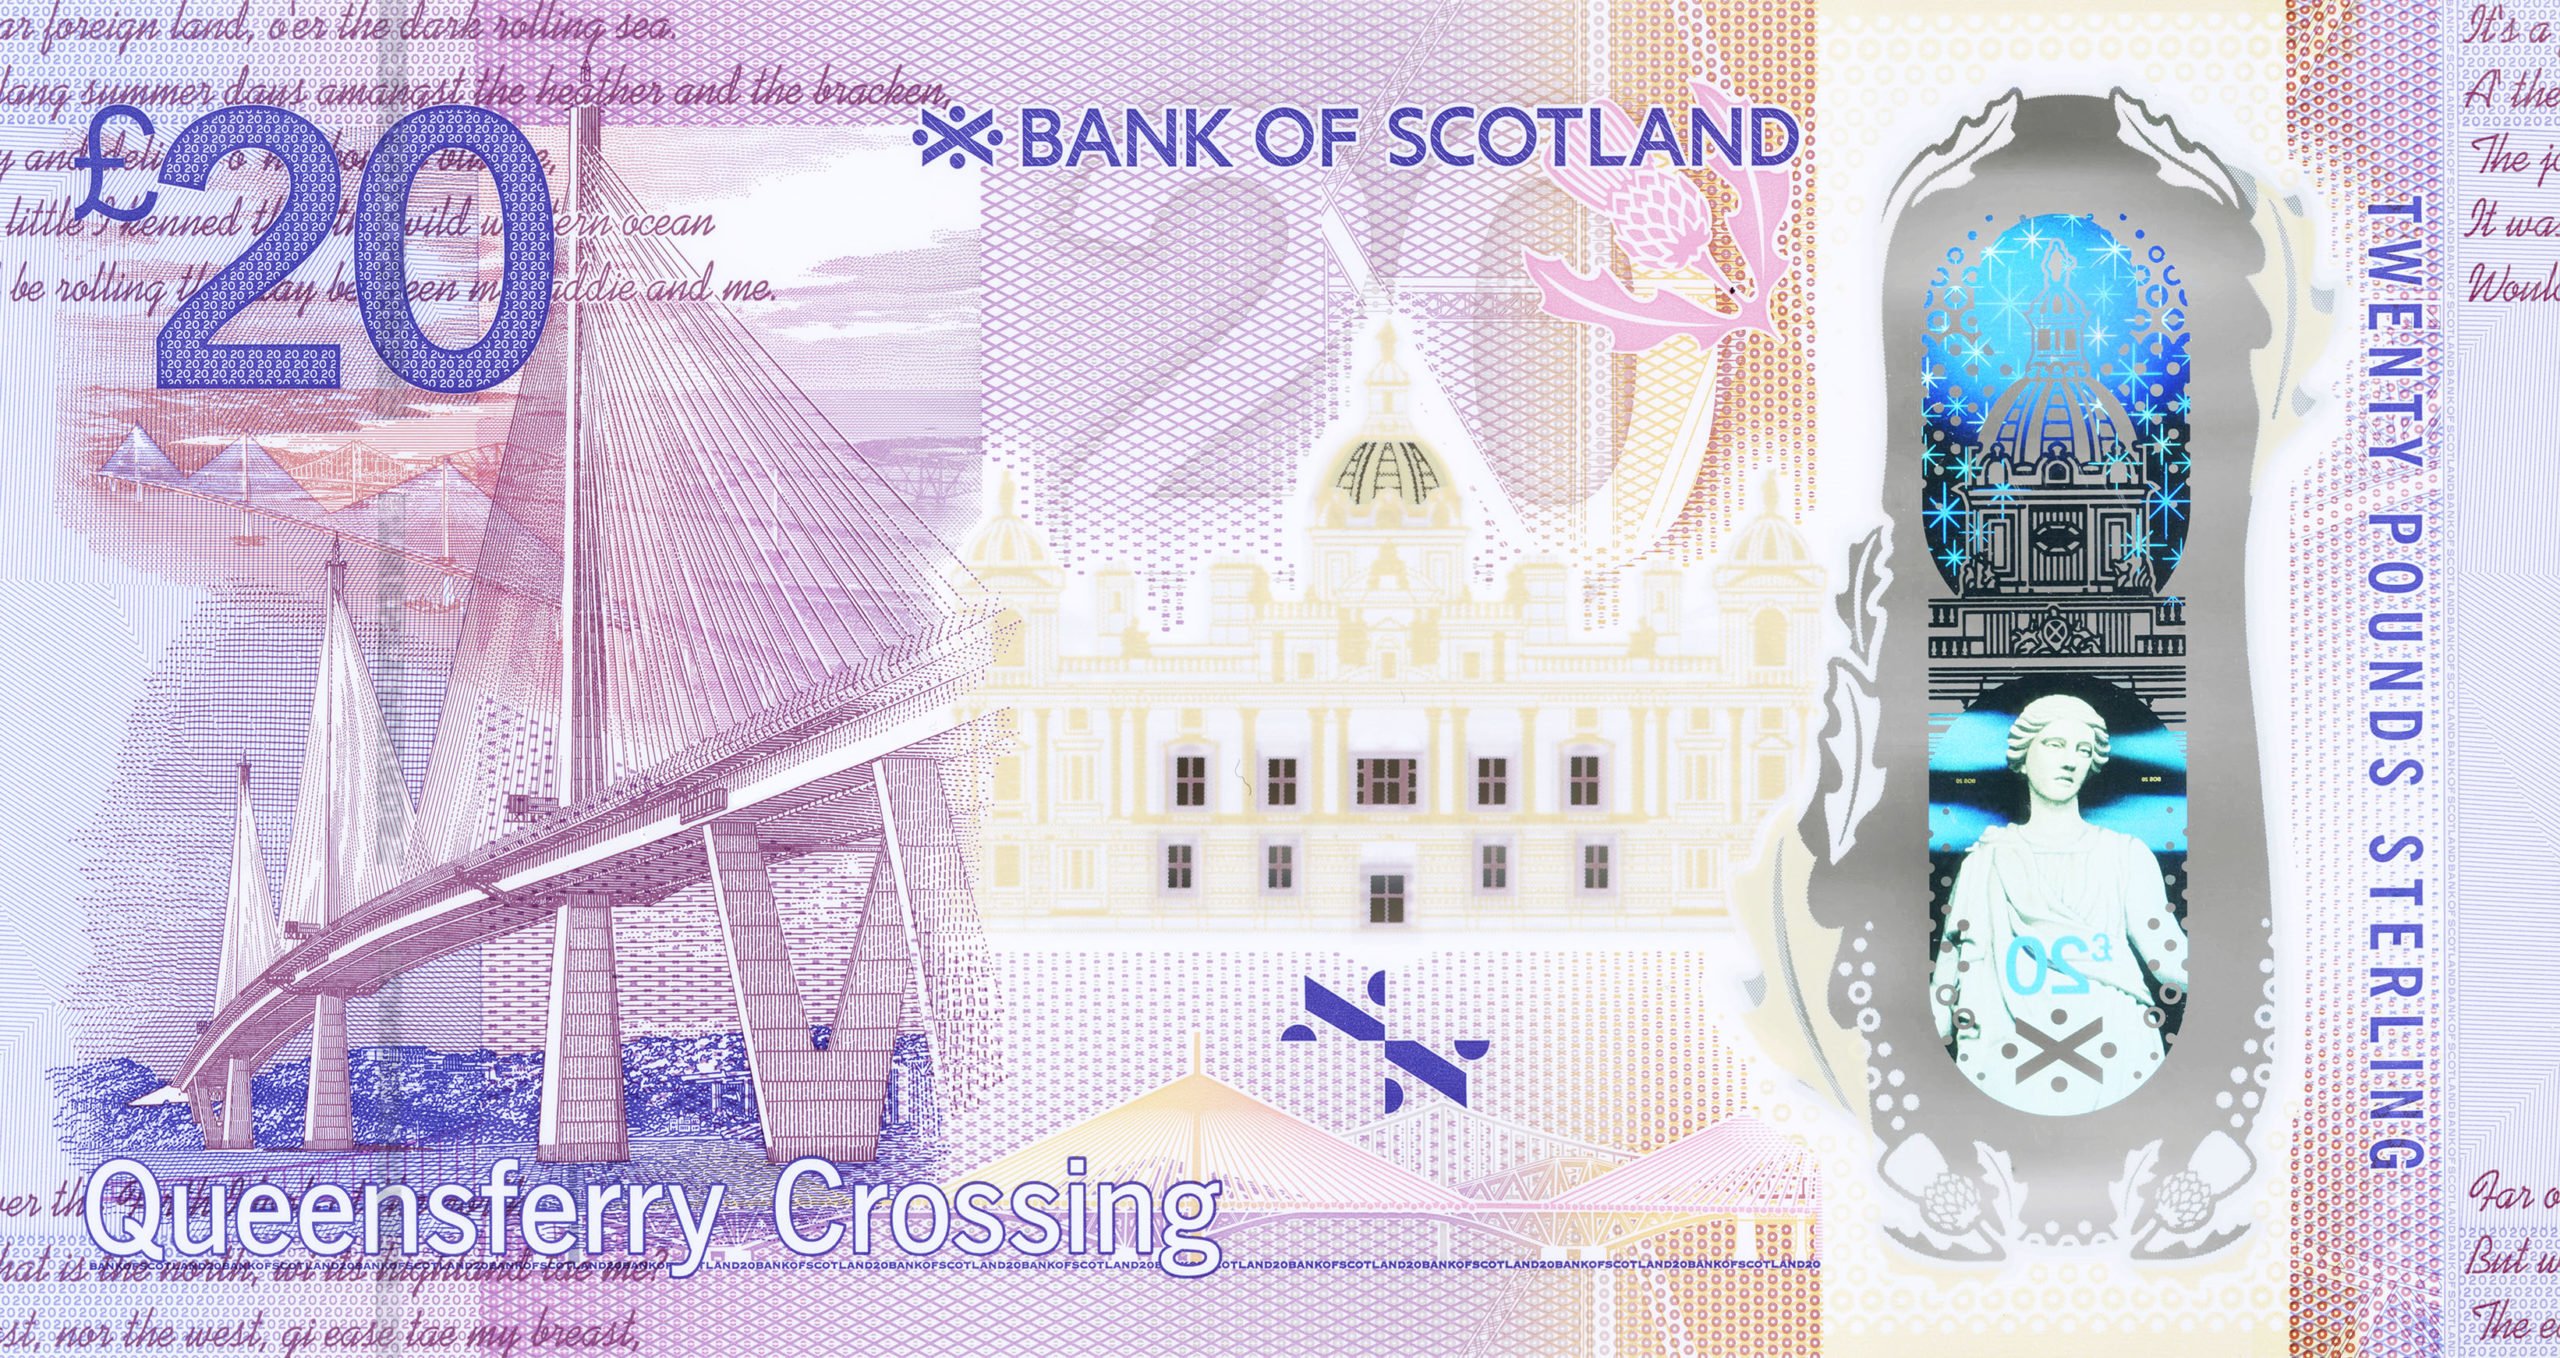 Queensferry Crossing: The bridge appeared on a limited number of notes.